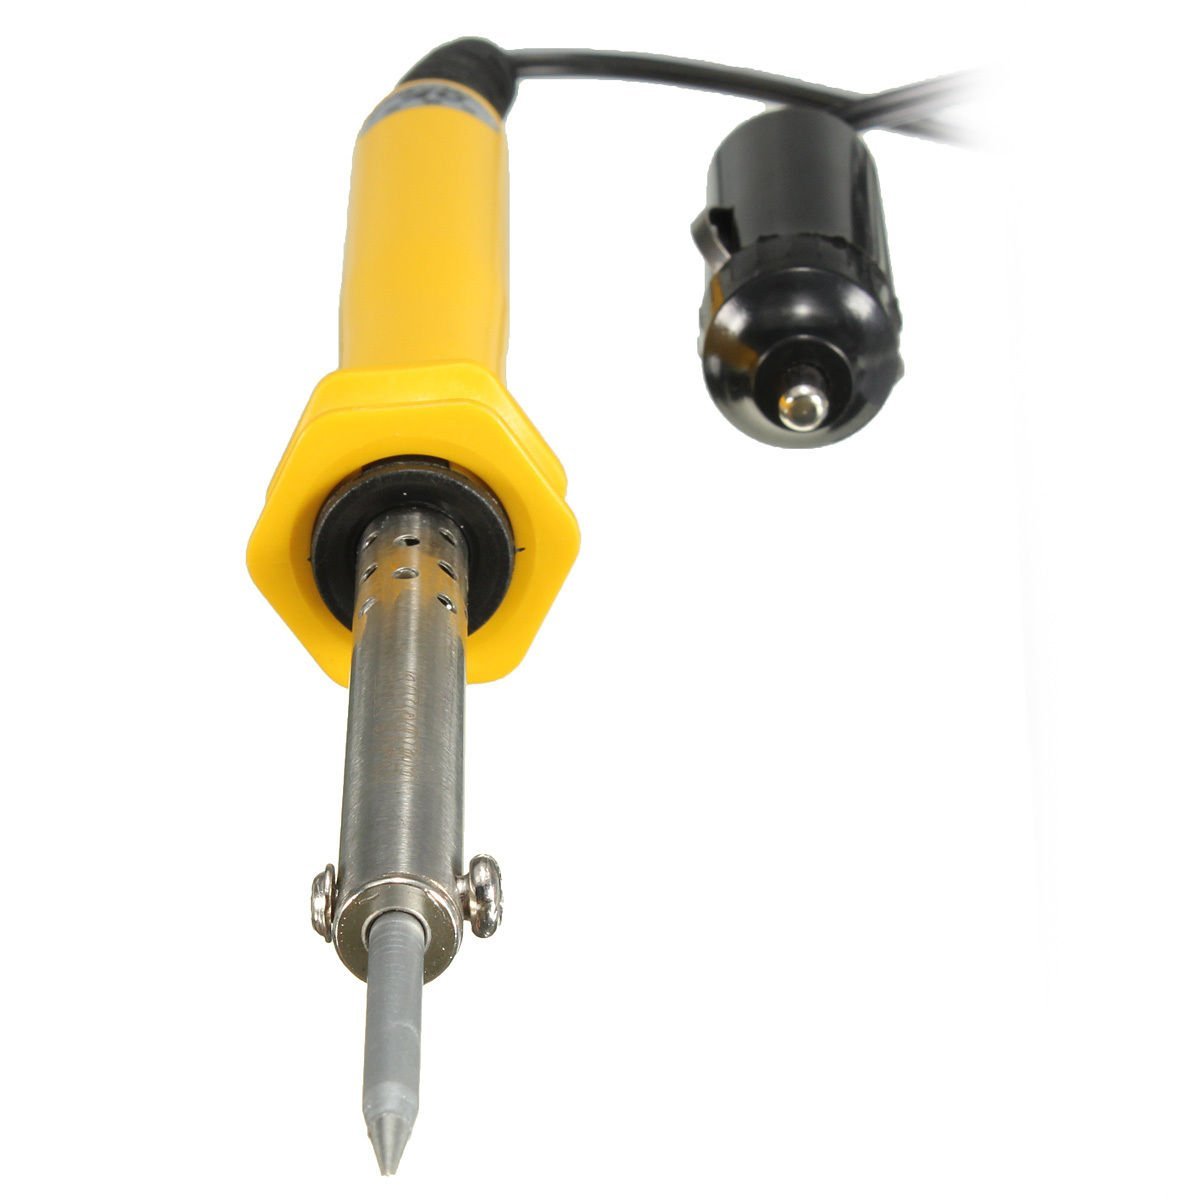 GJ-DC-12V-30W-Low-Voltage-Bevel-eEectric-Soldering-Iron-Fitted-with-Cigarette-Lighter-Plug-for-Auto--1135259-4